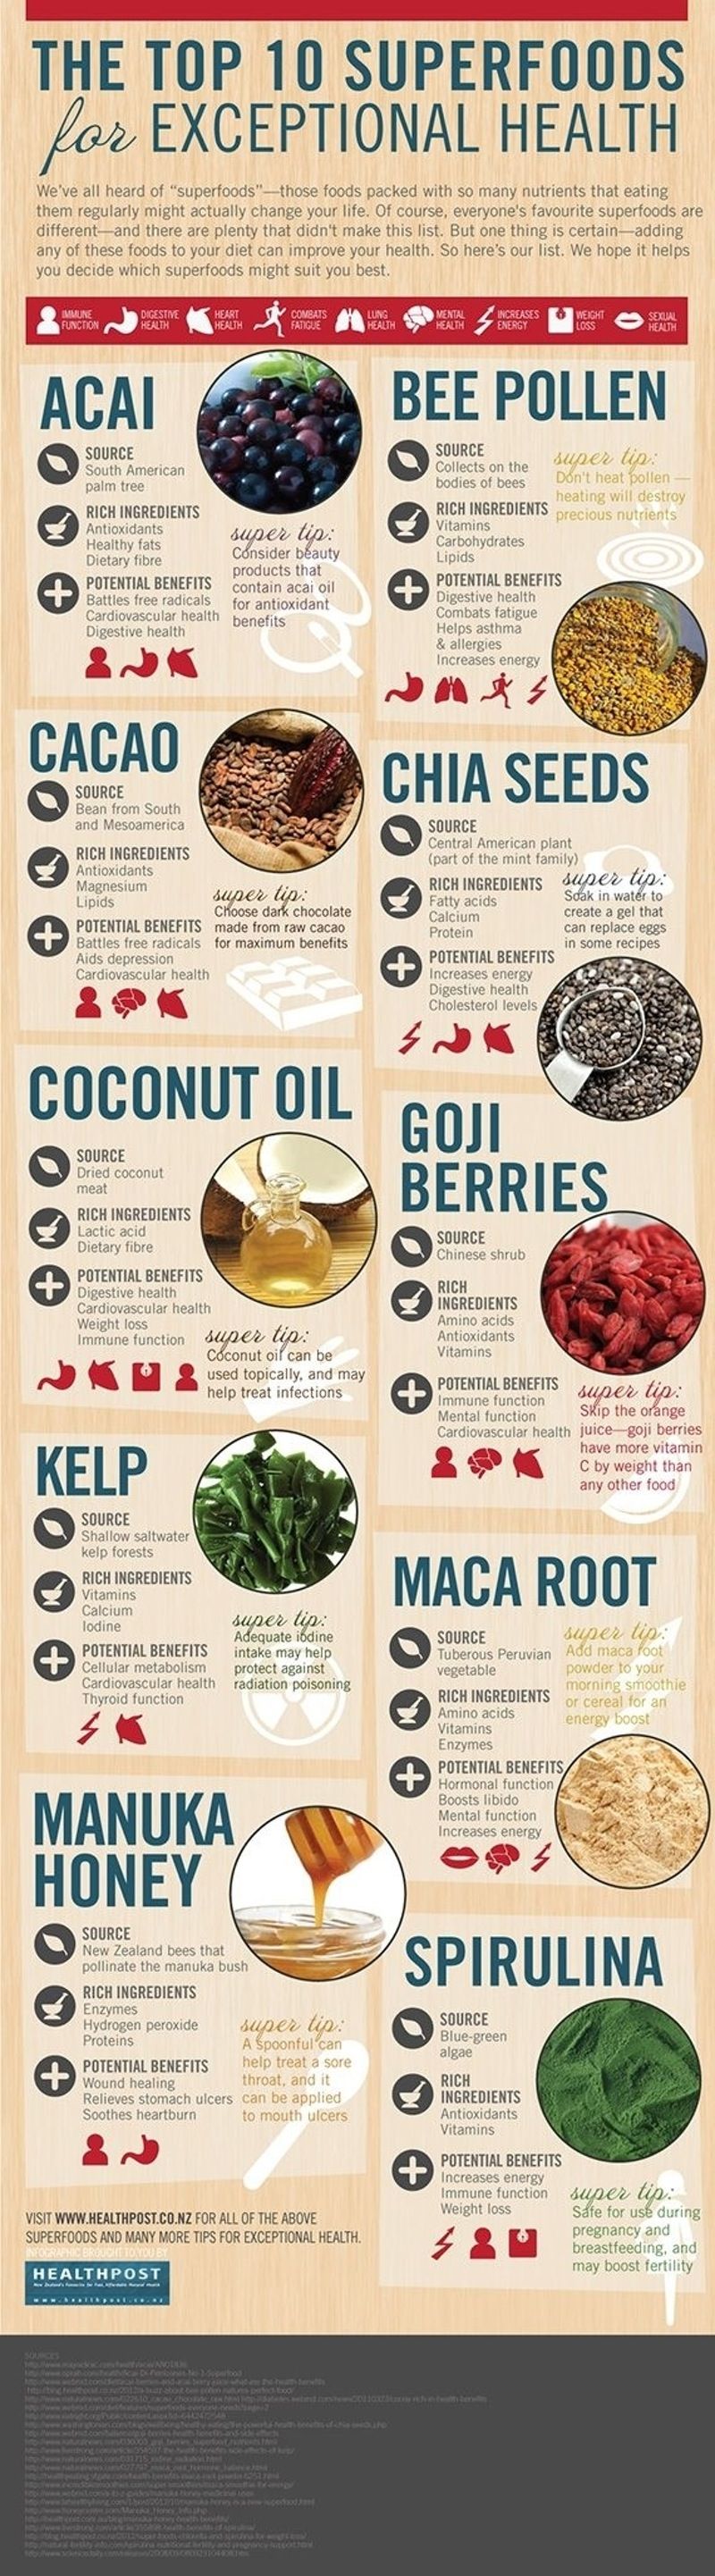 Top 10 Superfoods For Exceptional Health